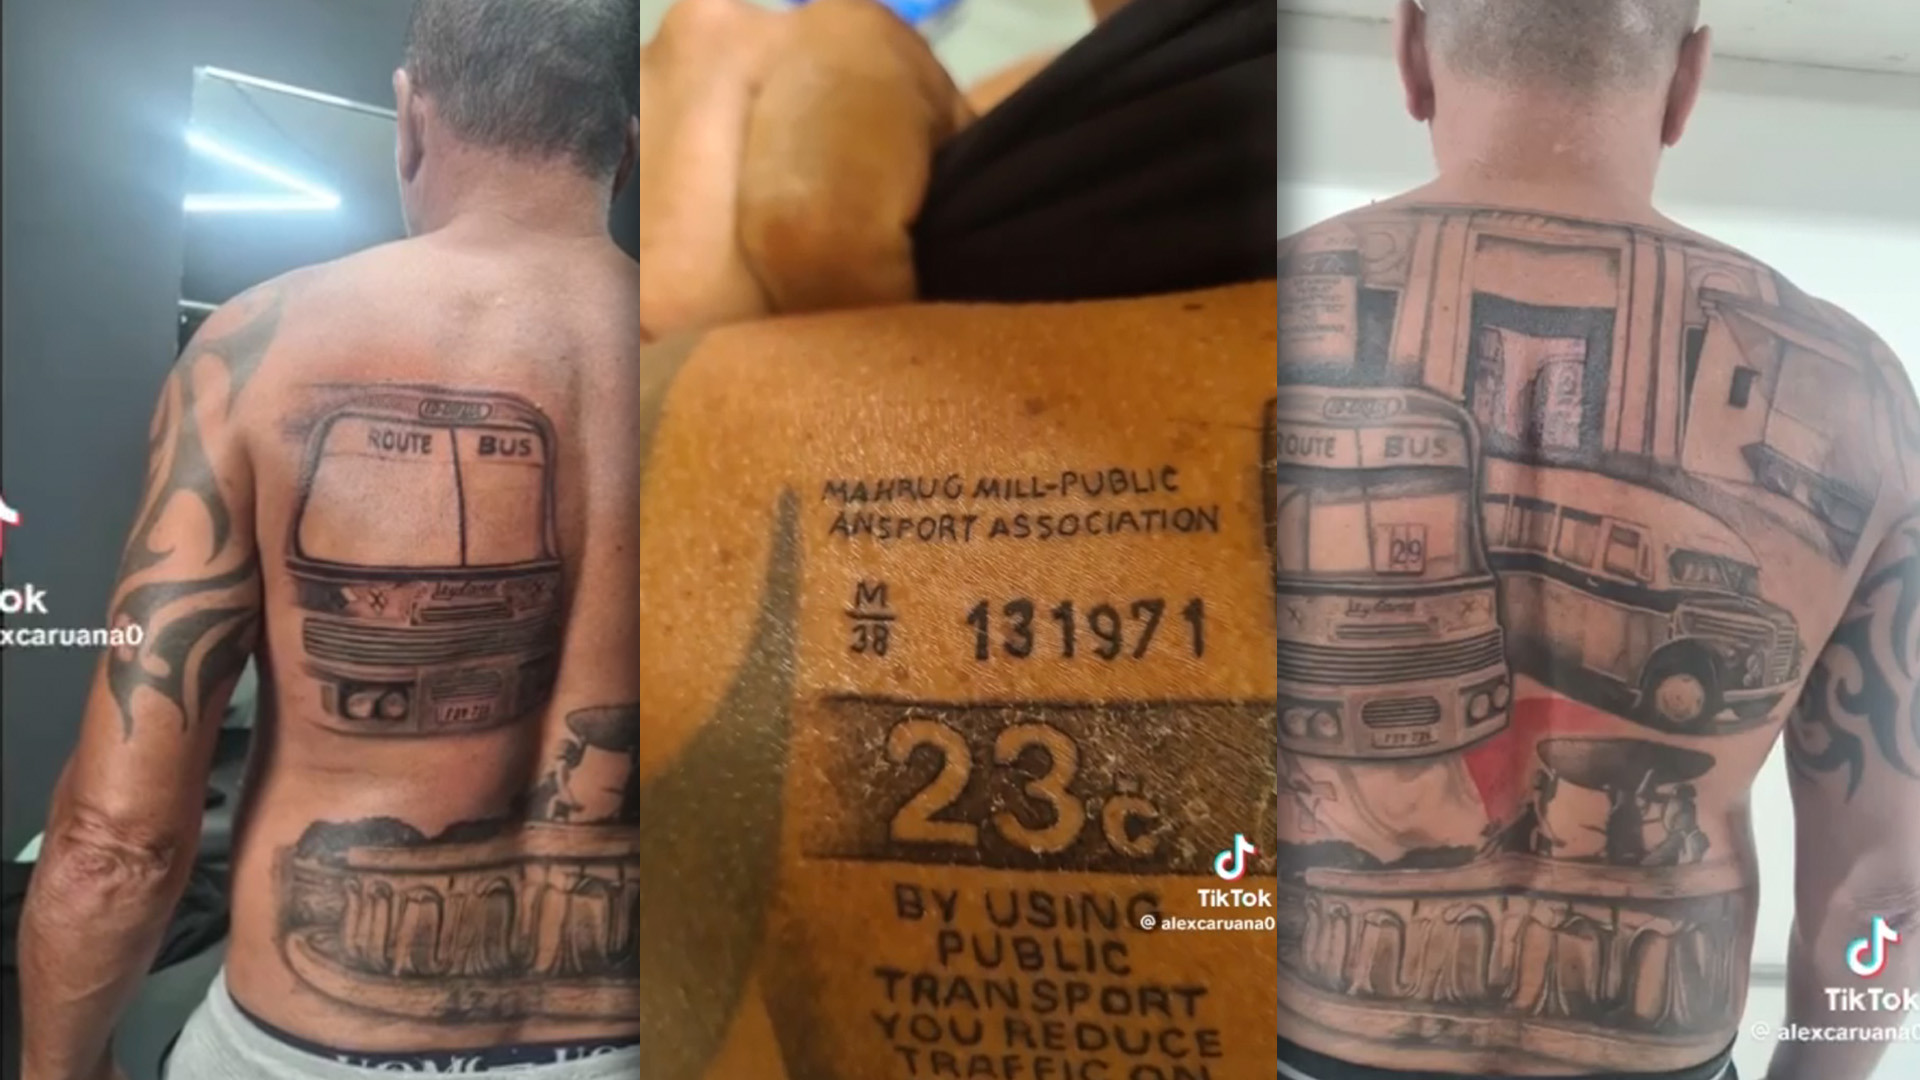 Man's Patriotic Back Tattoo Features Old Valletta Gate, Buses & Triton Fountain